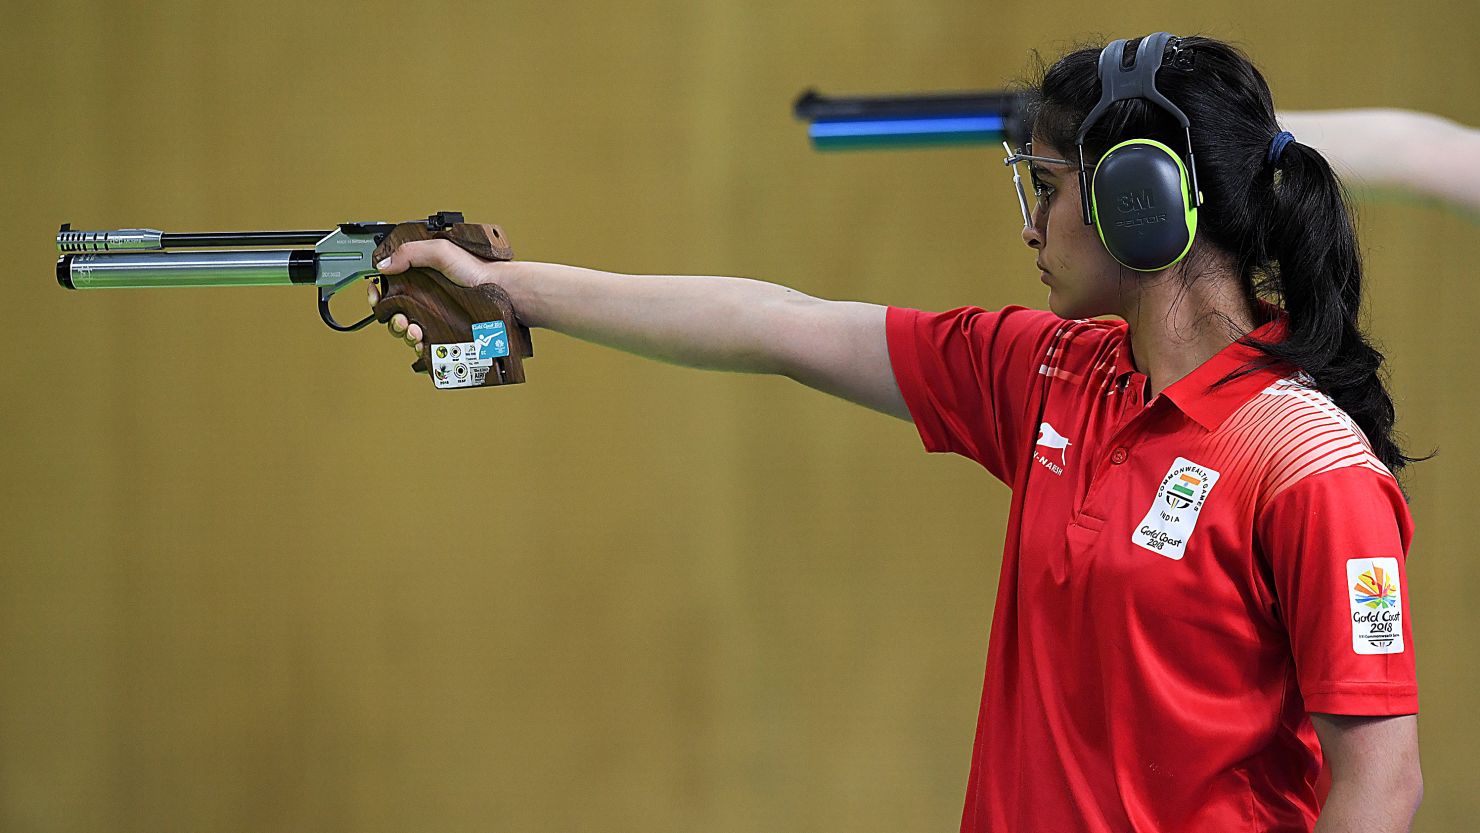 Manu Bhaker of India competes in the women's 10-meter air pistol final.